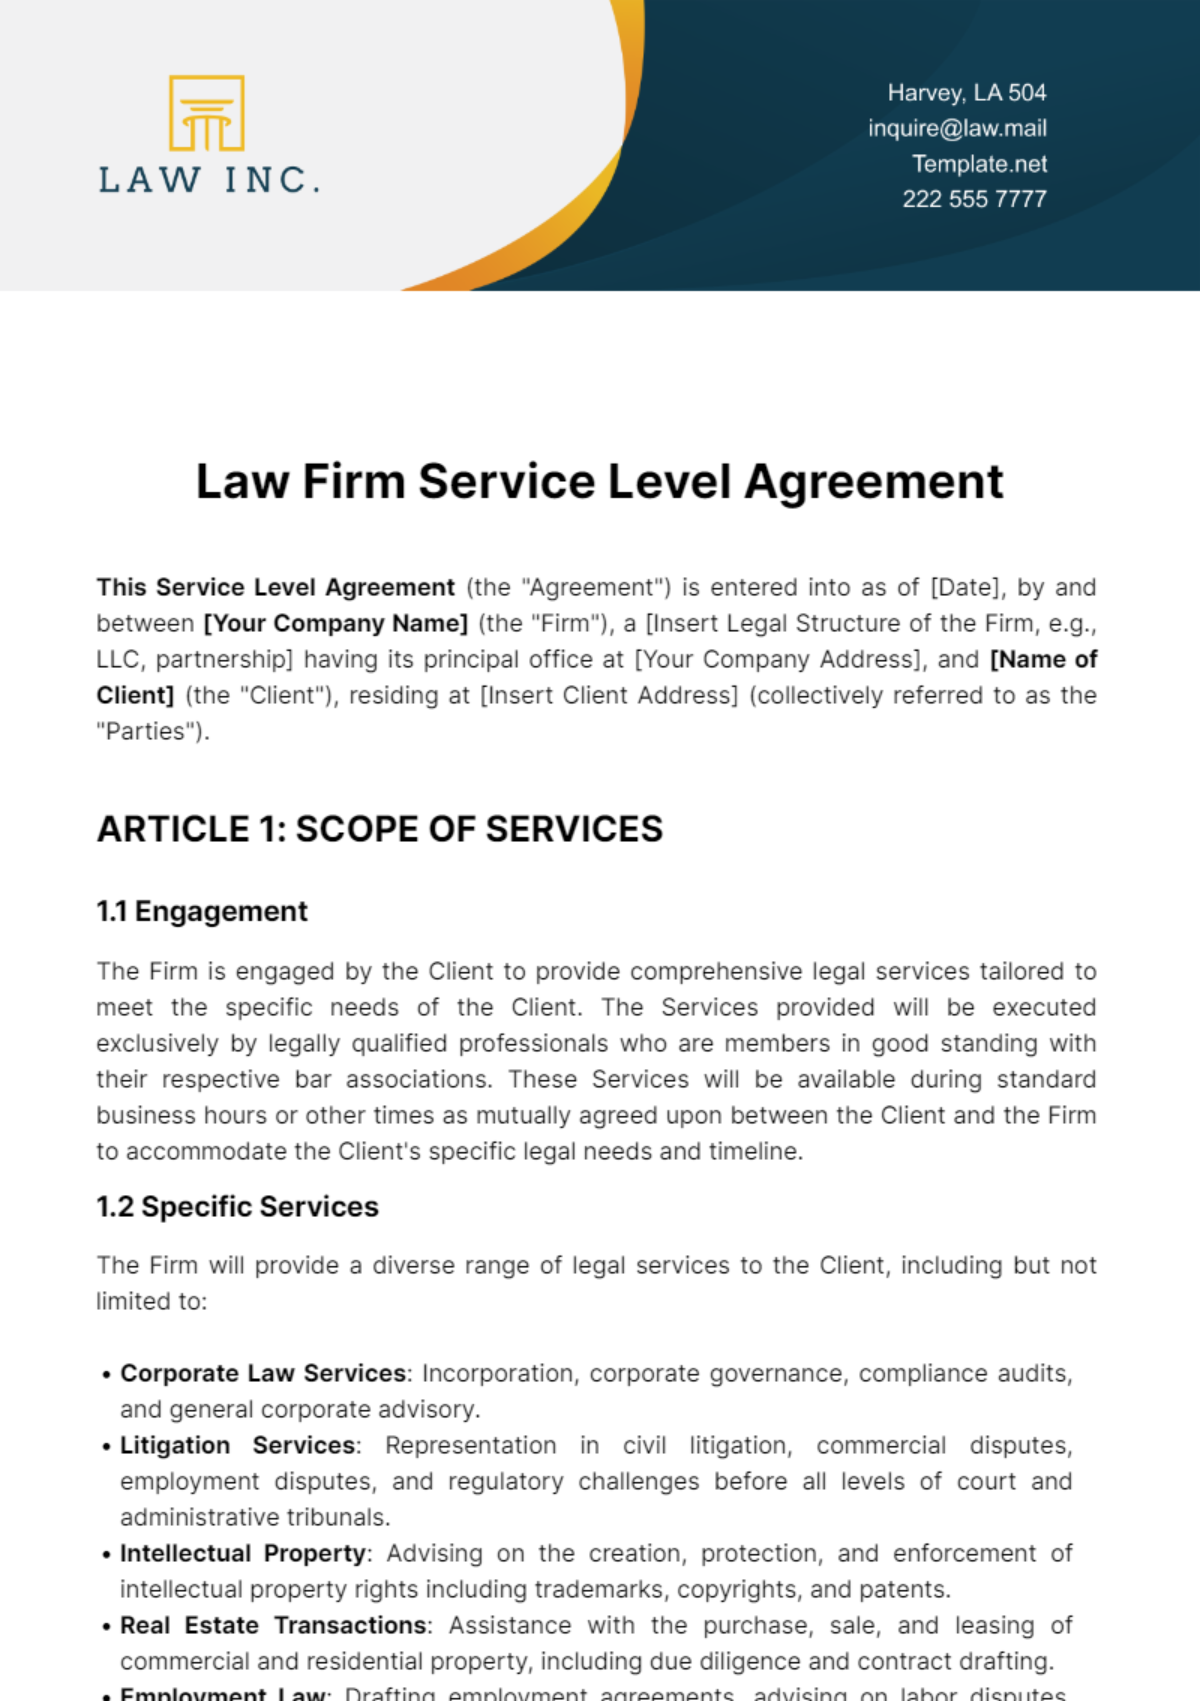 Free Law Firm Service Level Agreement Template